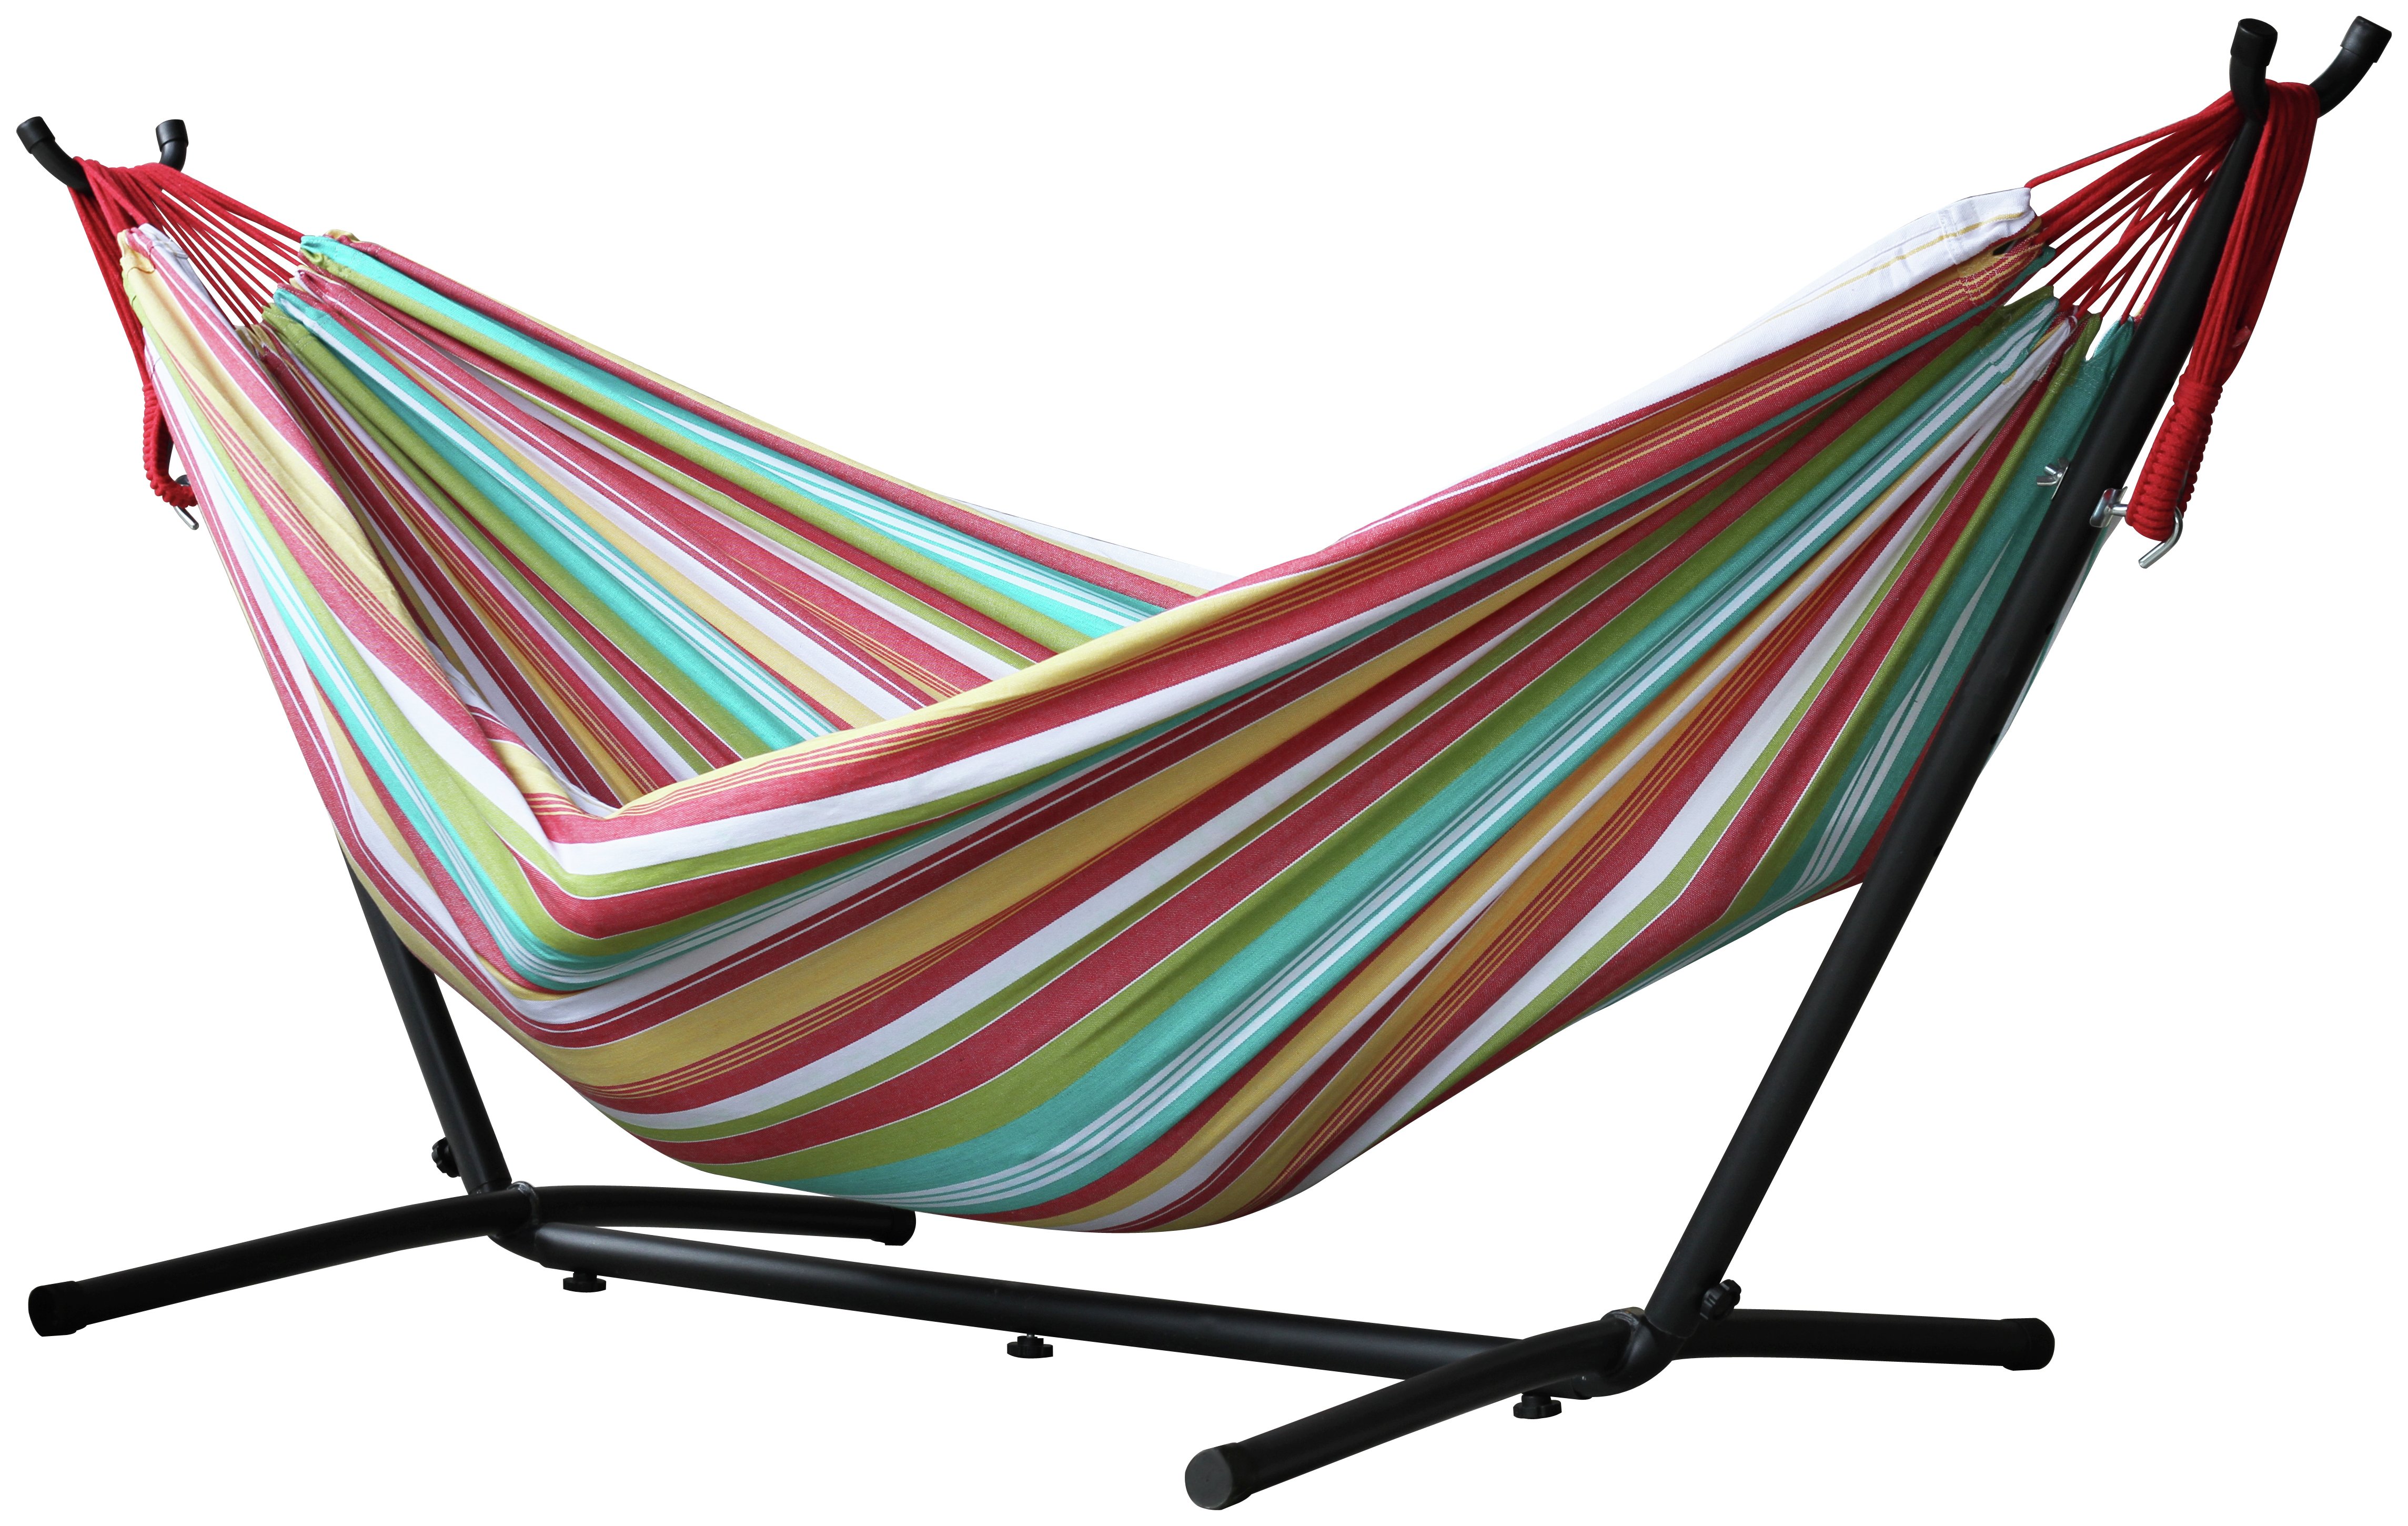 Vivere Double Cotton Hammock with Stand - Salsa